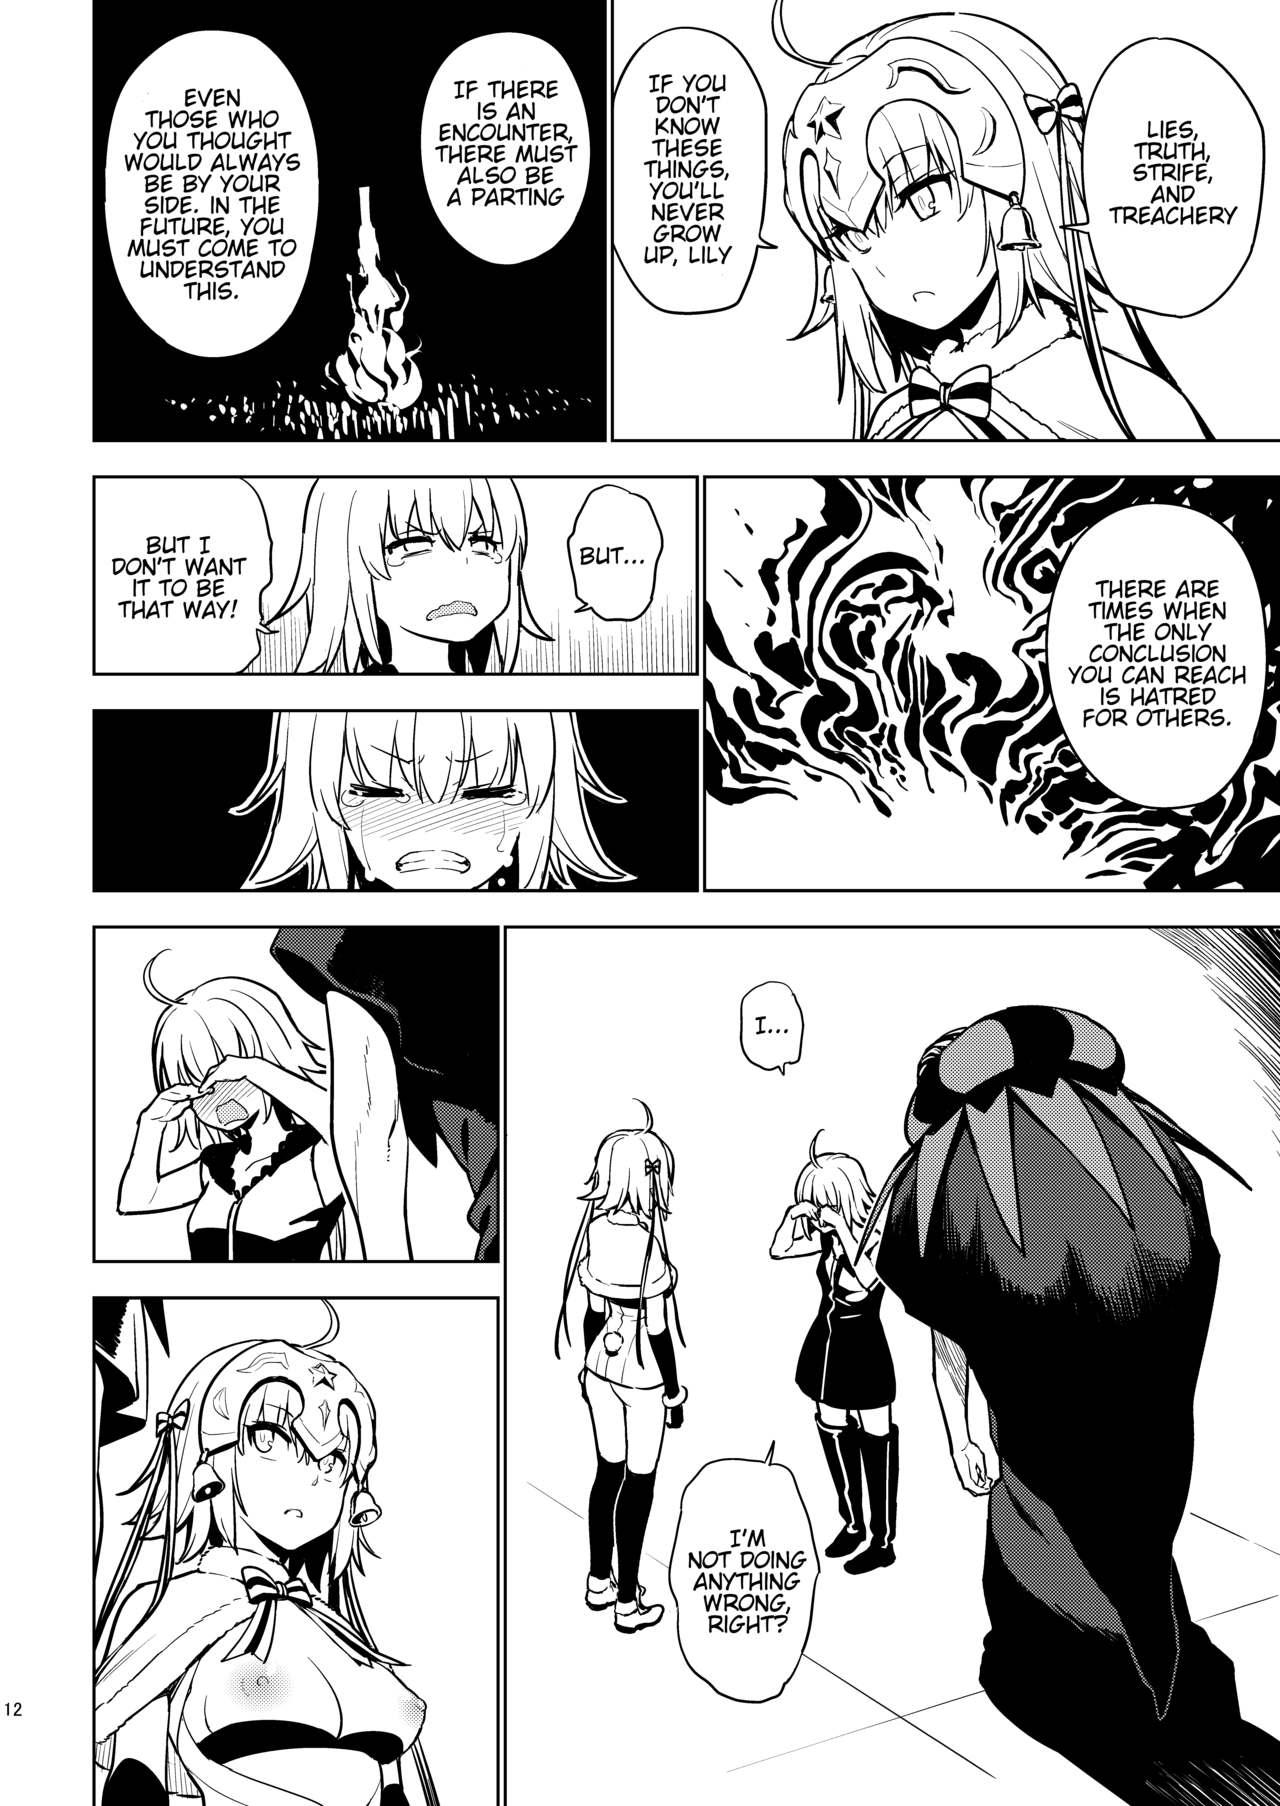 Exgf SO BORED - Fate grand order Petite Teen - Page 10